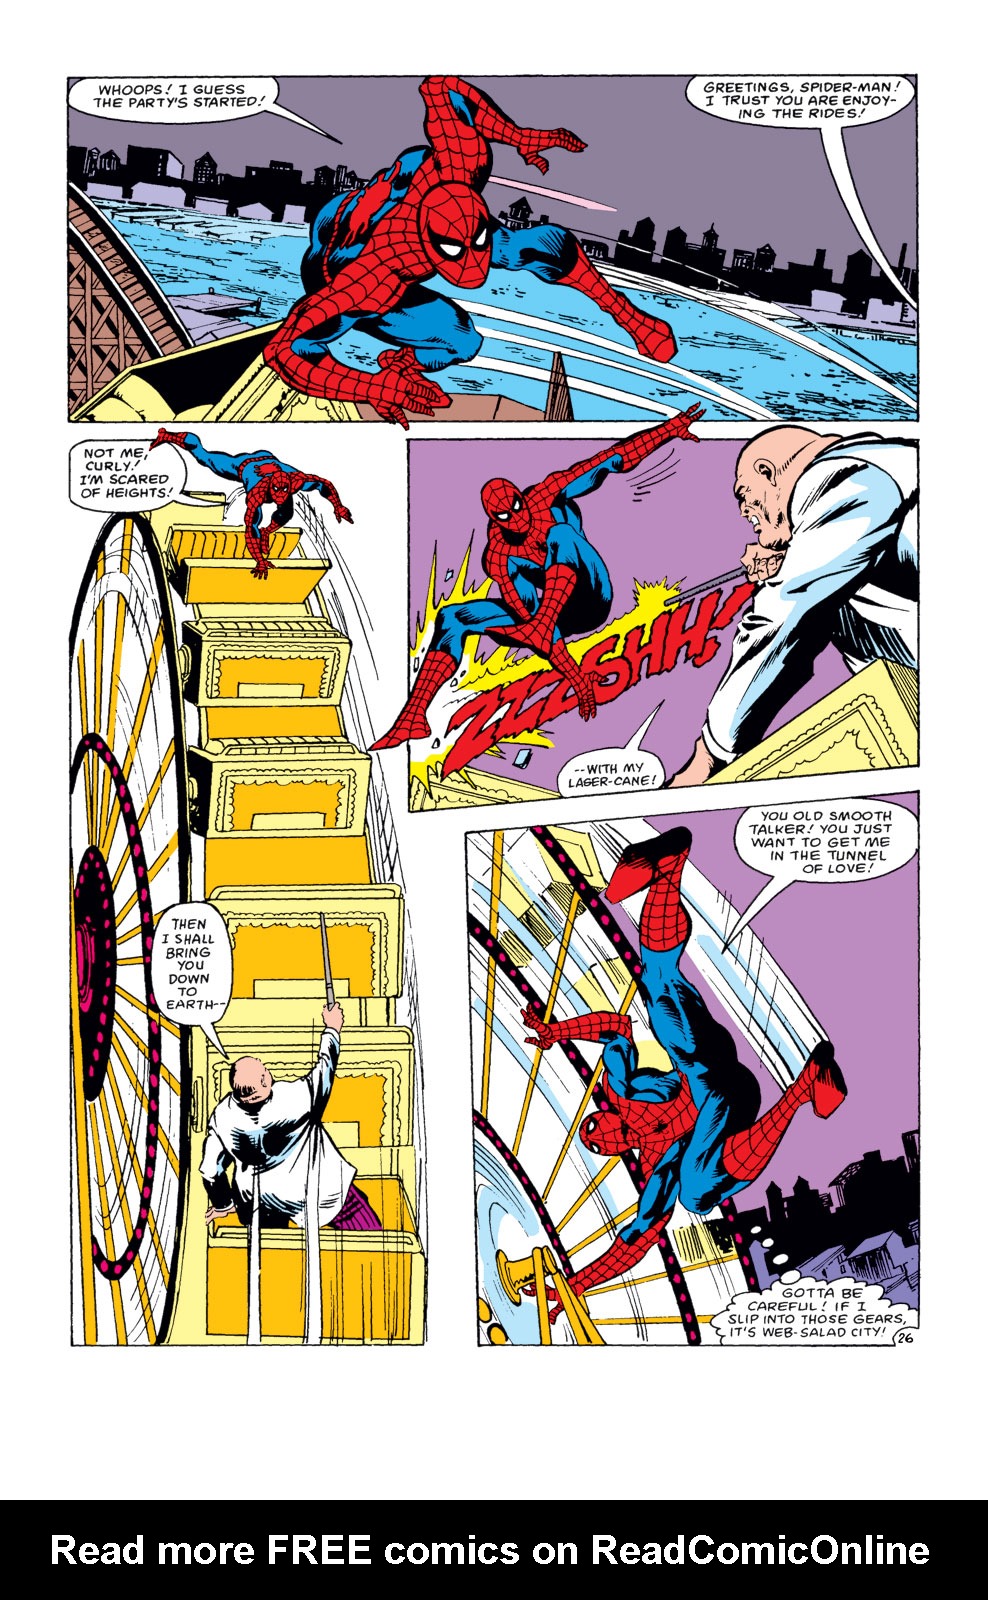 What If? (1977) issue 30 - Spider-Man's clone lived - Page 27